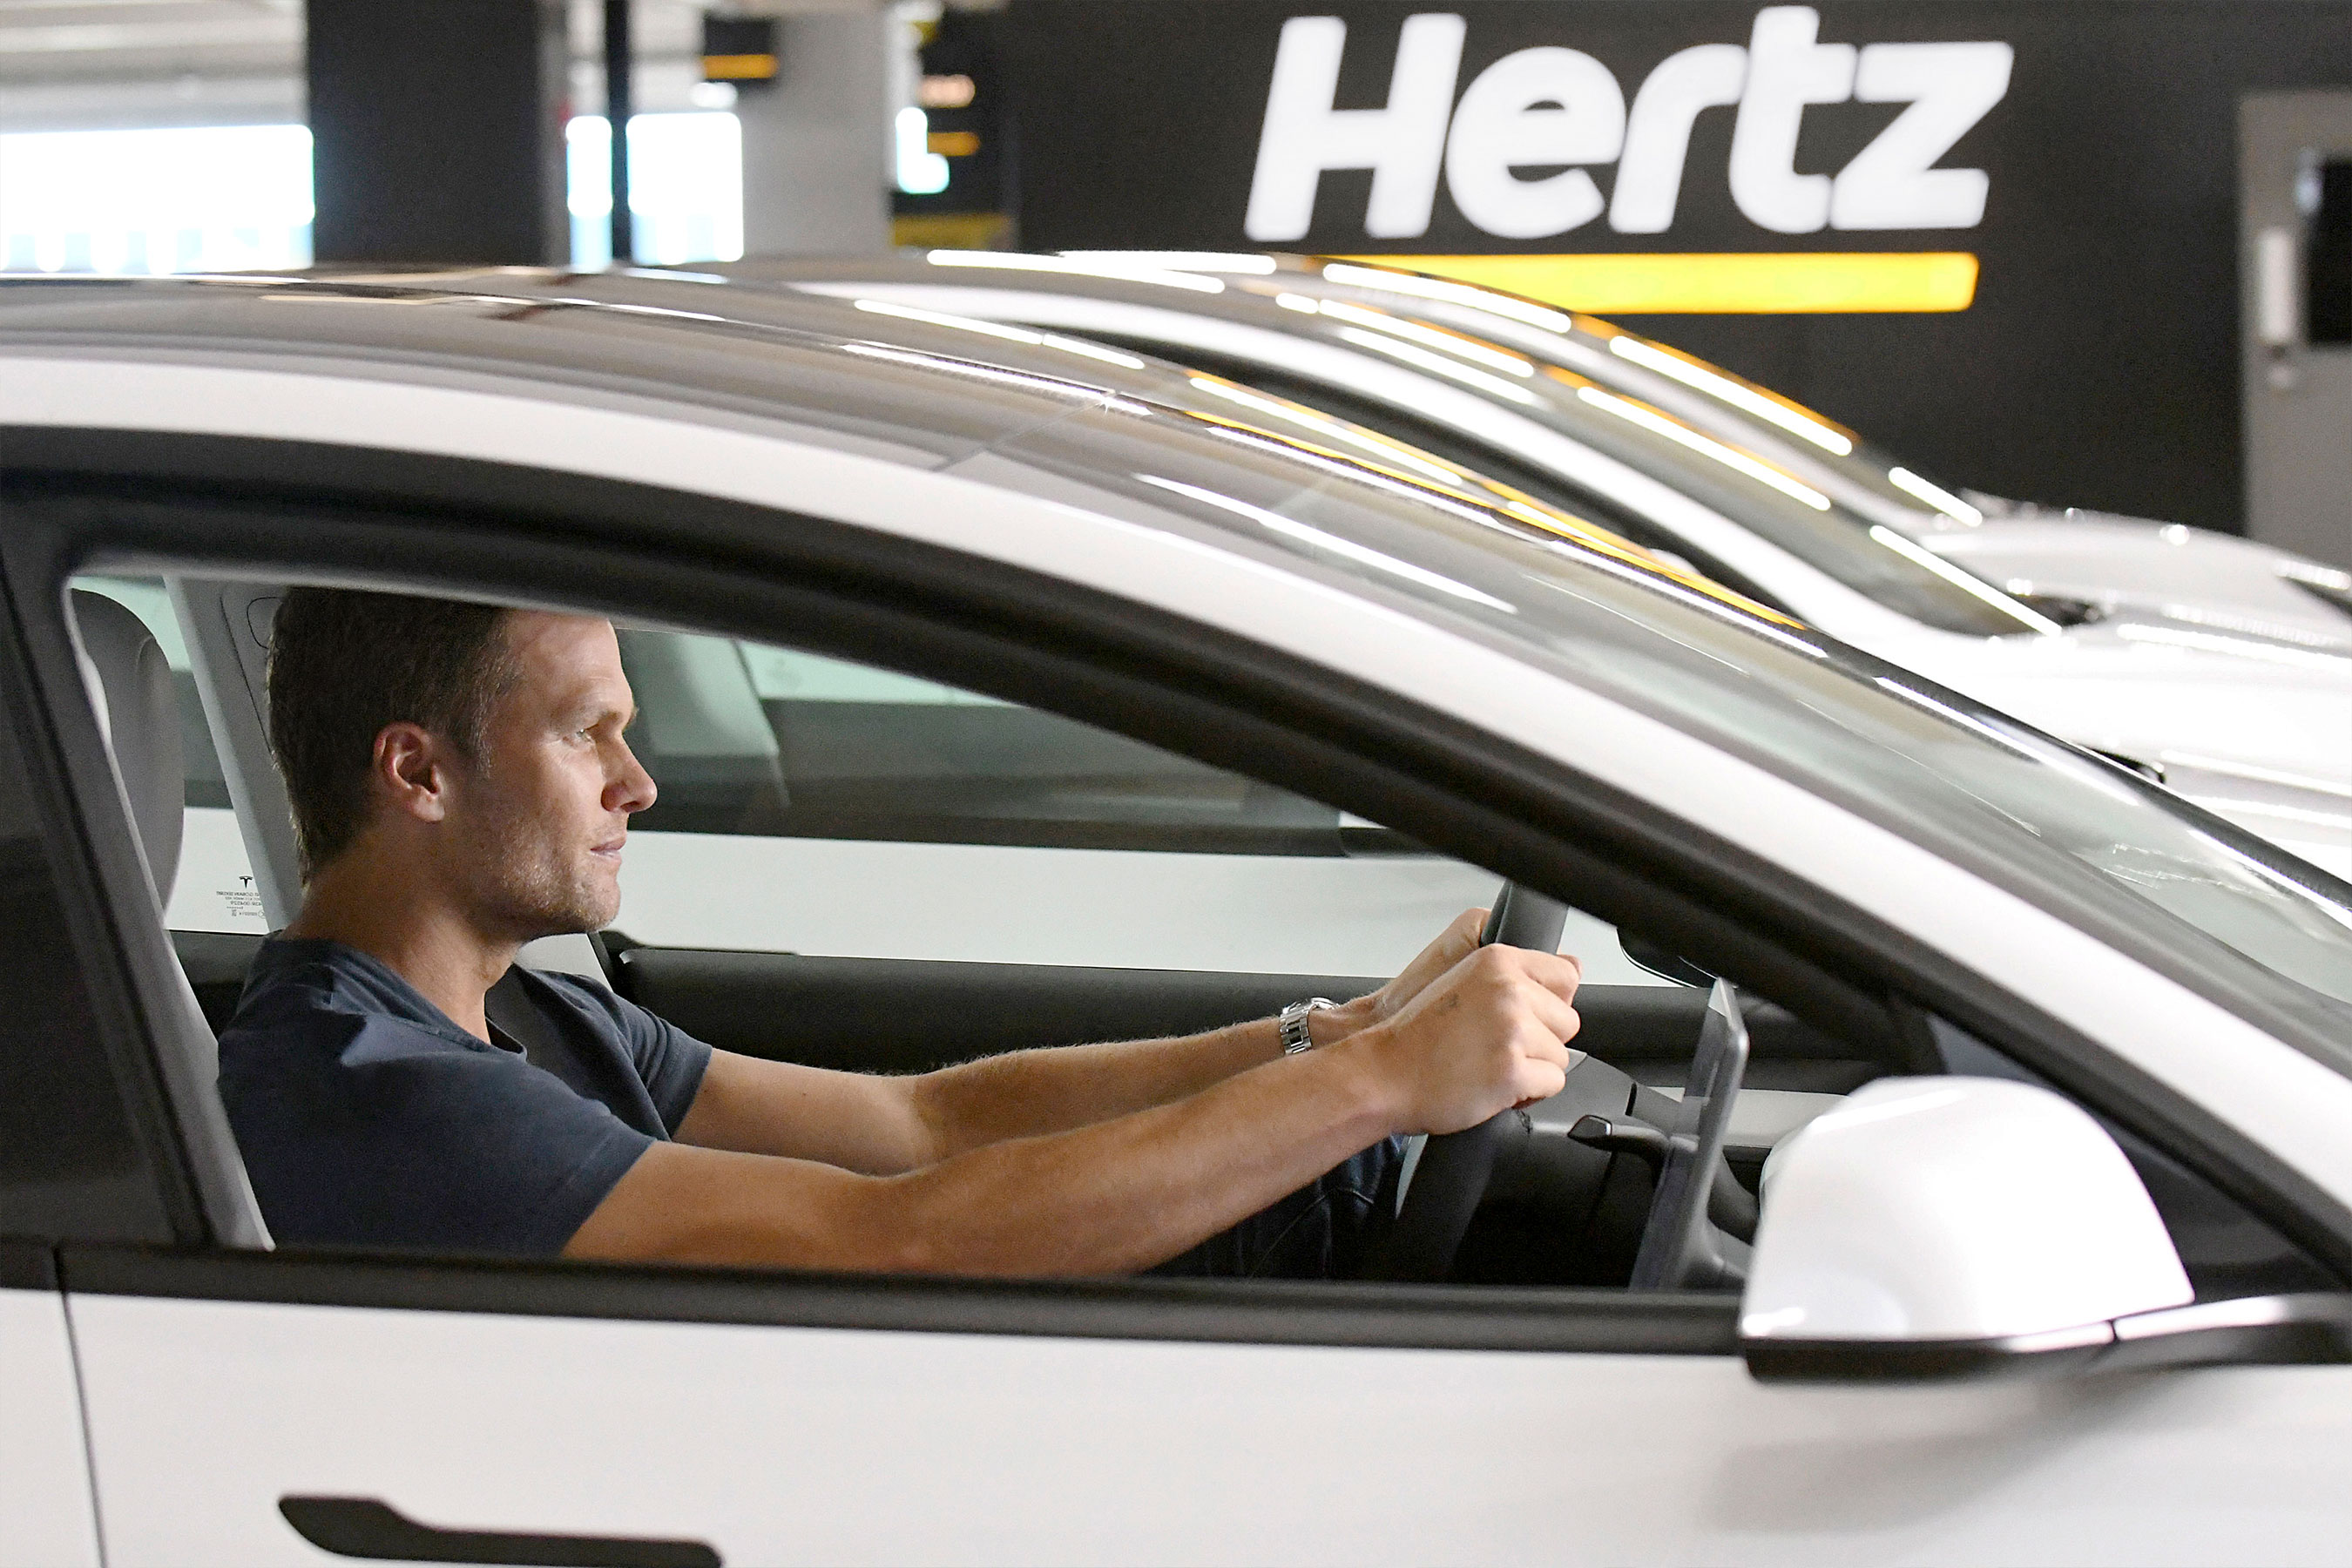 On set at Hertz’s "Speed" commercial, which uses humor and Tom Brady’s “Let’s Go” game-day rallying cry to underscore Hertz’s reputation for excellence, speed and ease during the travel experience.